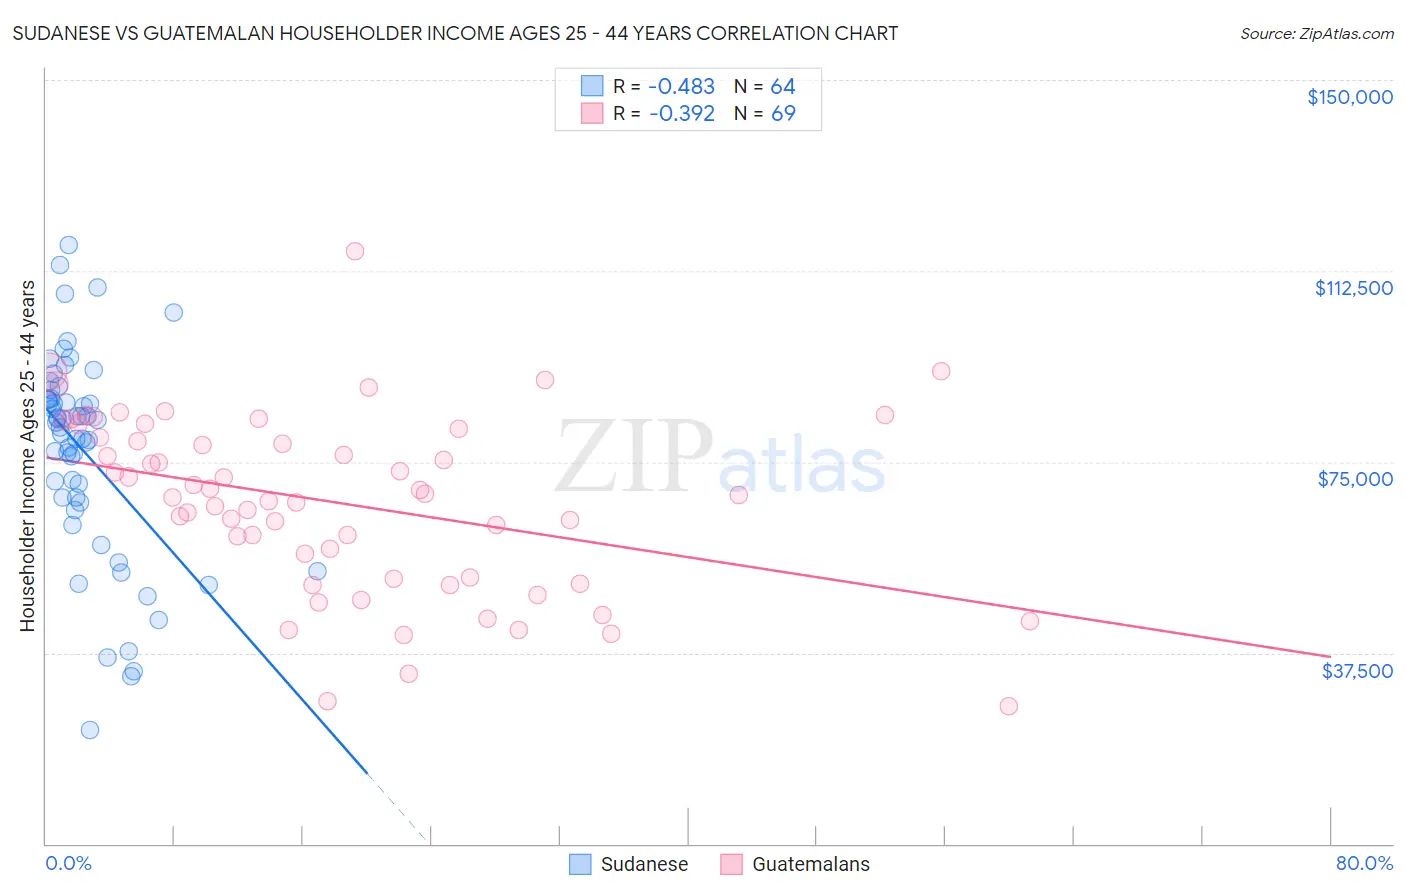 Sudanese vs Guatemalan Householder Income Ages 25 - 44 years